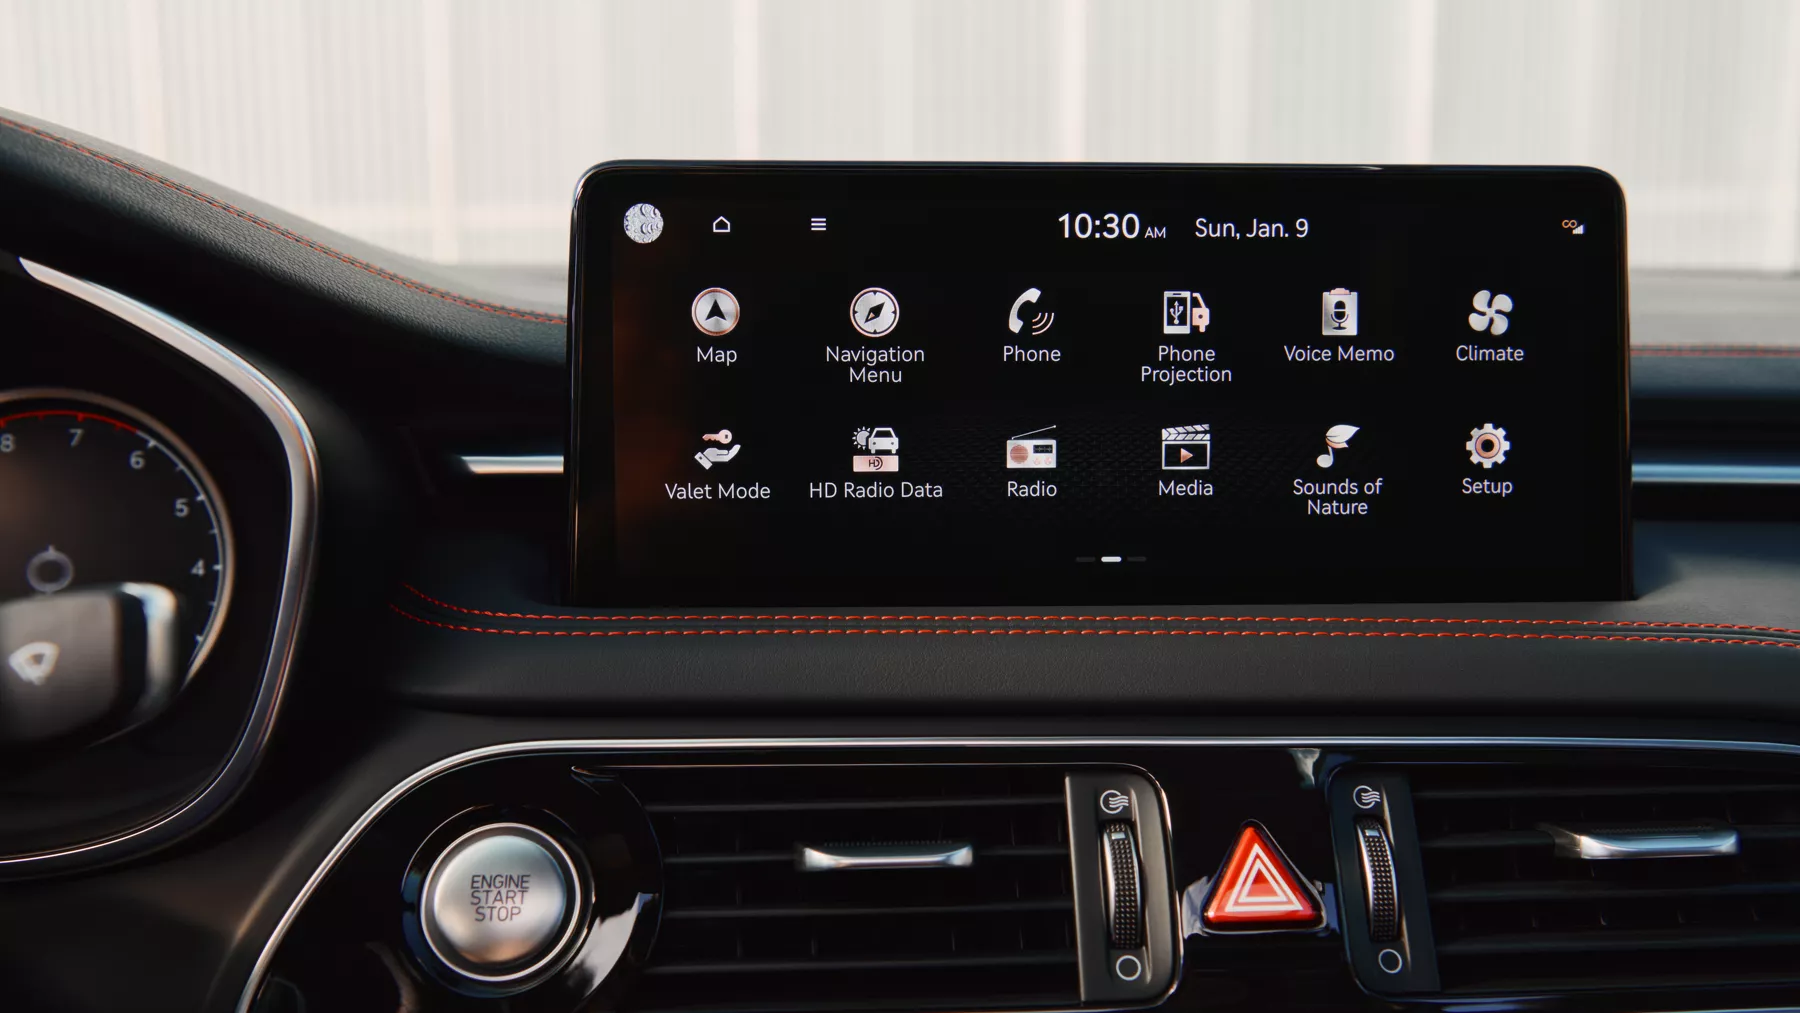 G70 infotainment display showing icons.